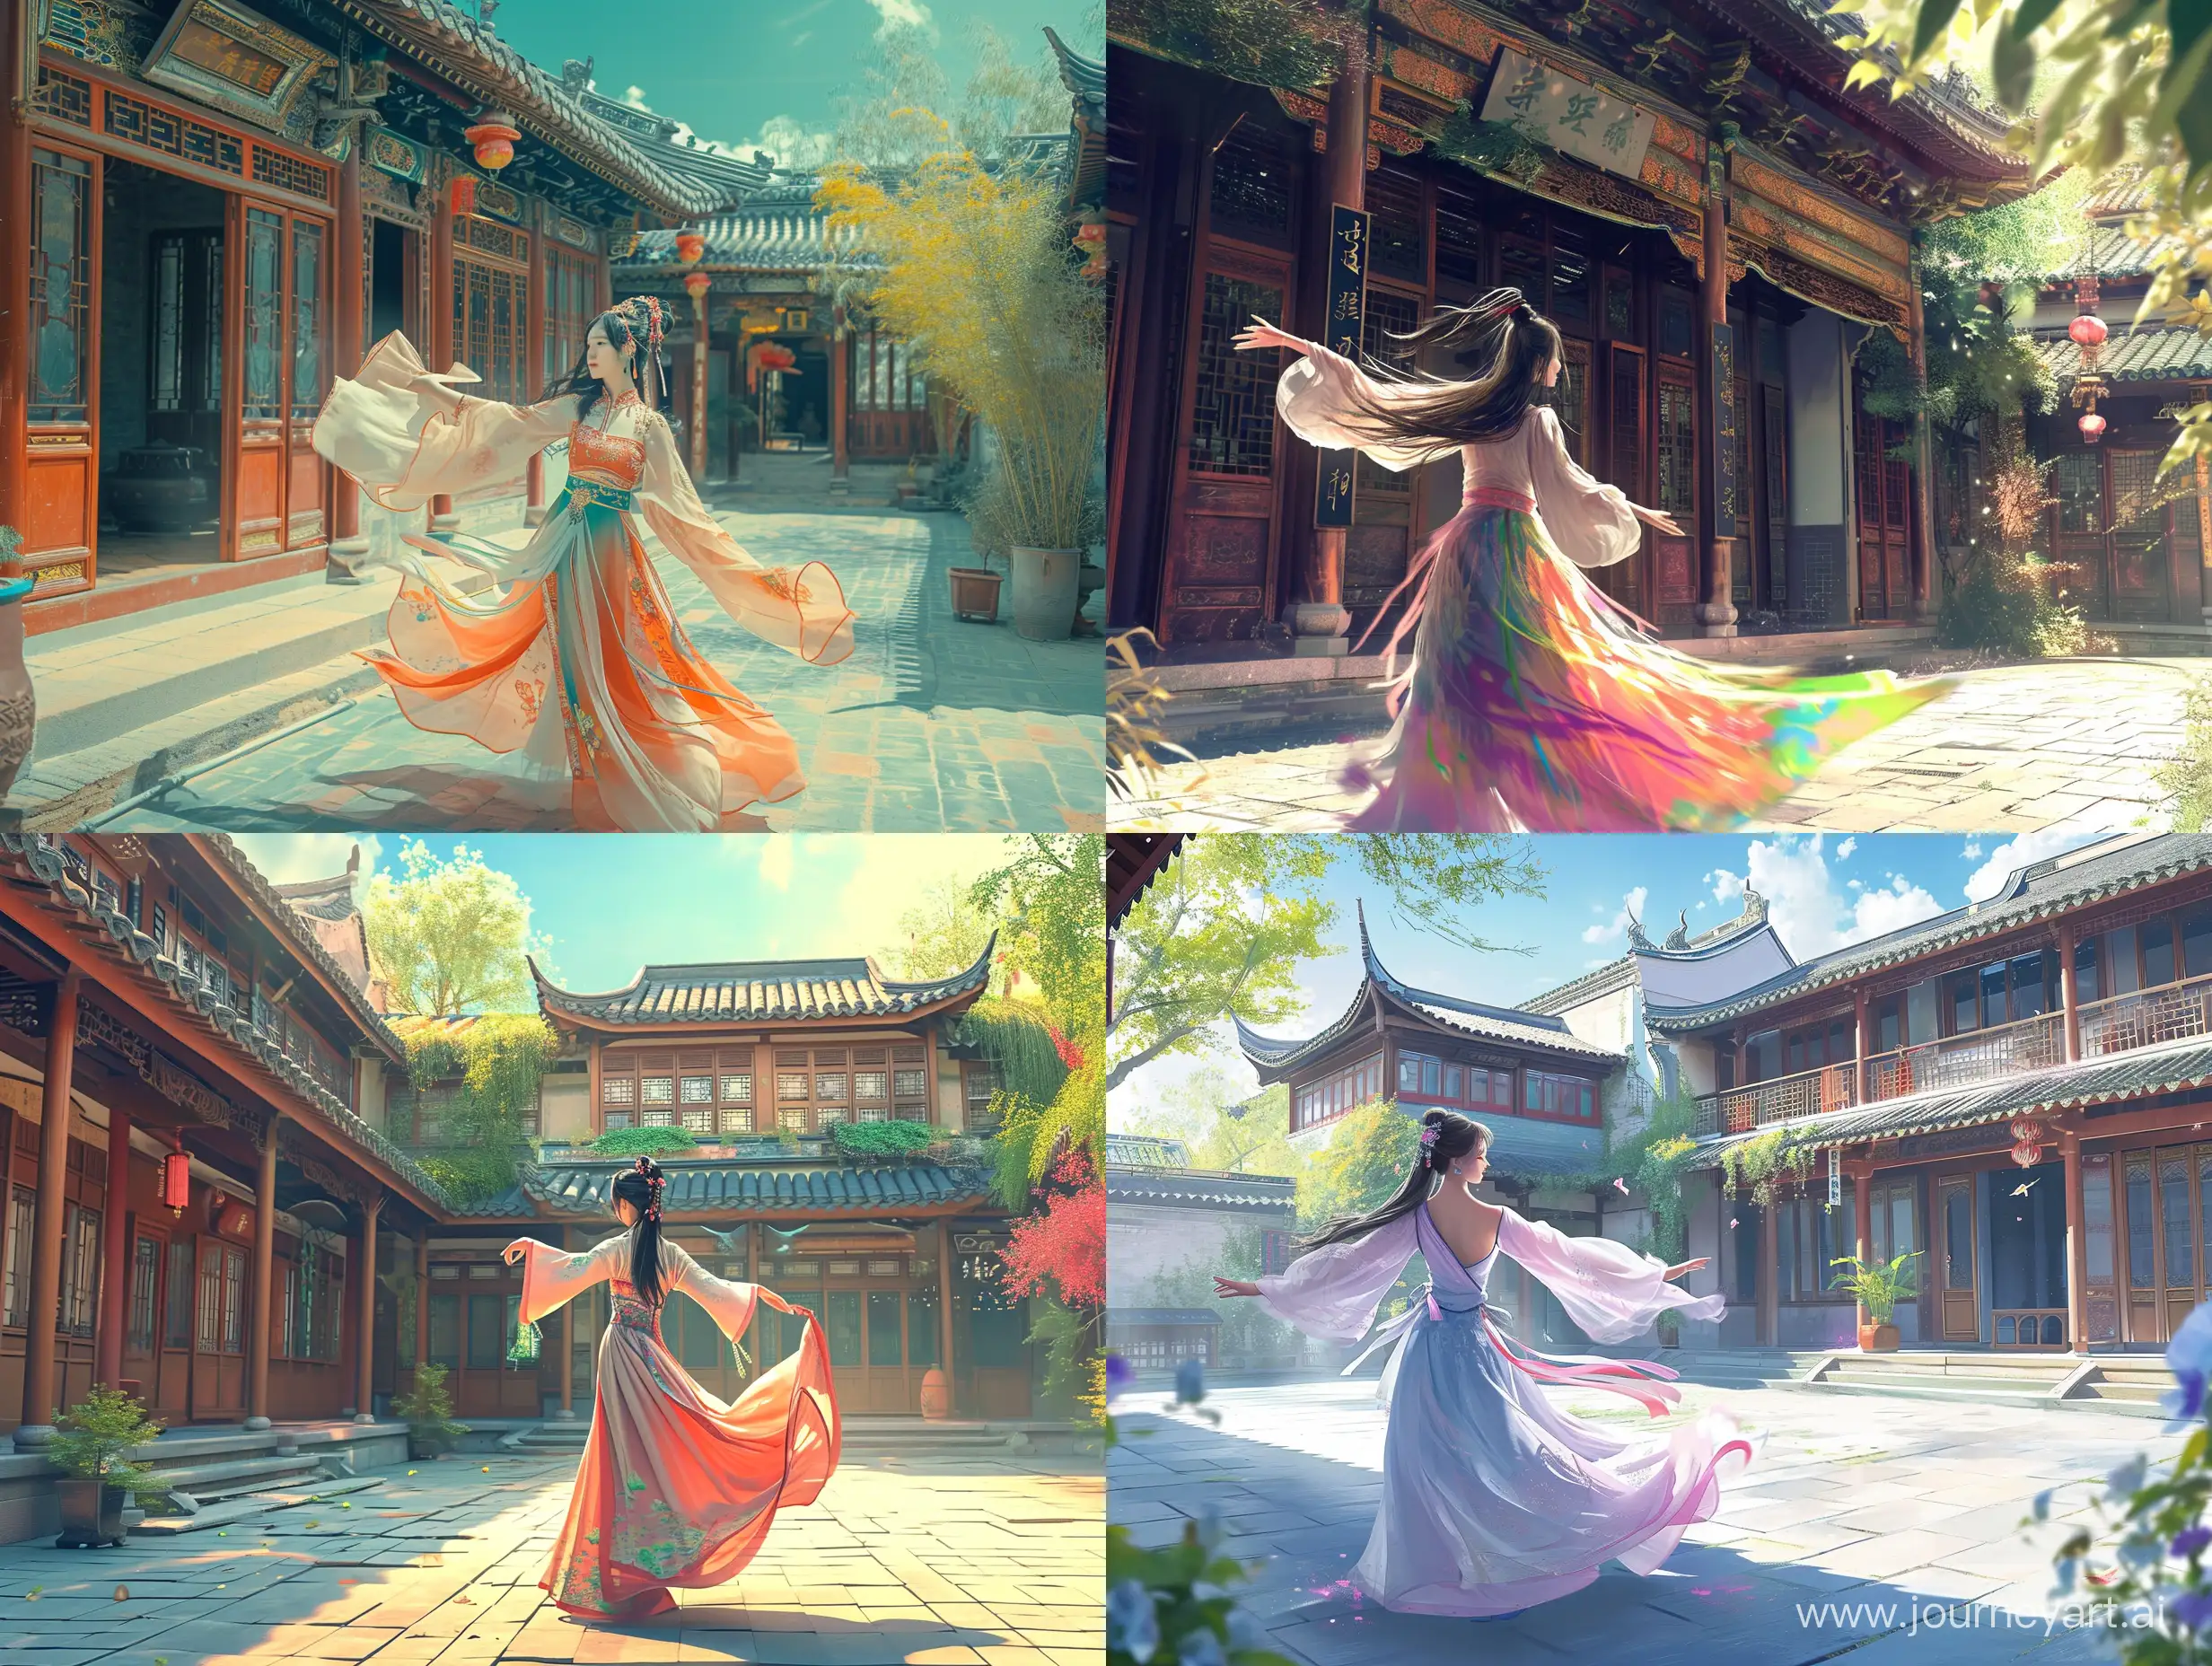 Elegant-Chinese-Dance-in-a-Mansion-Courtyard